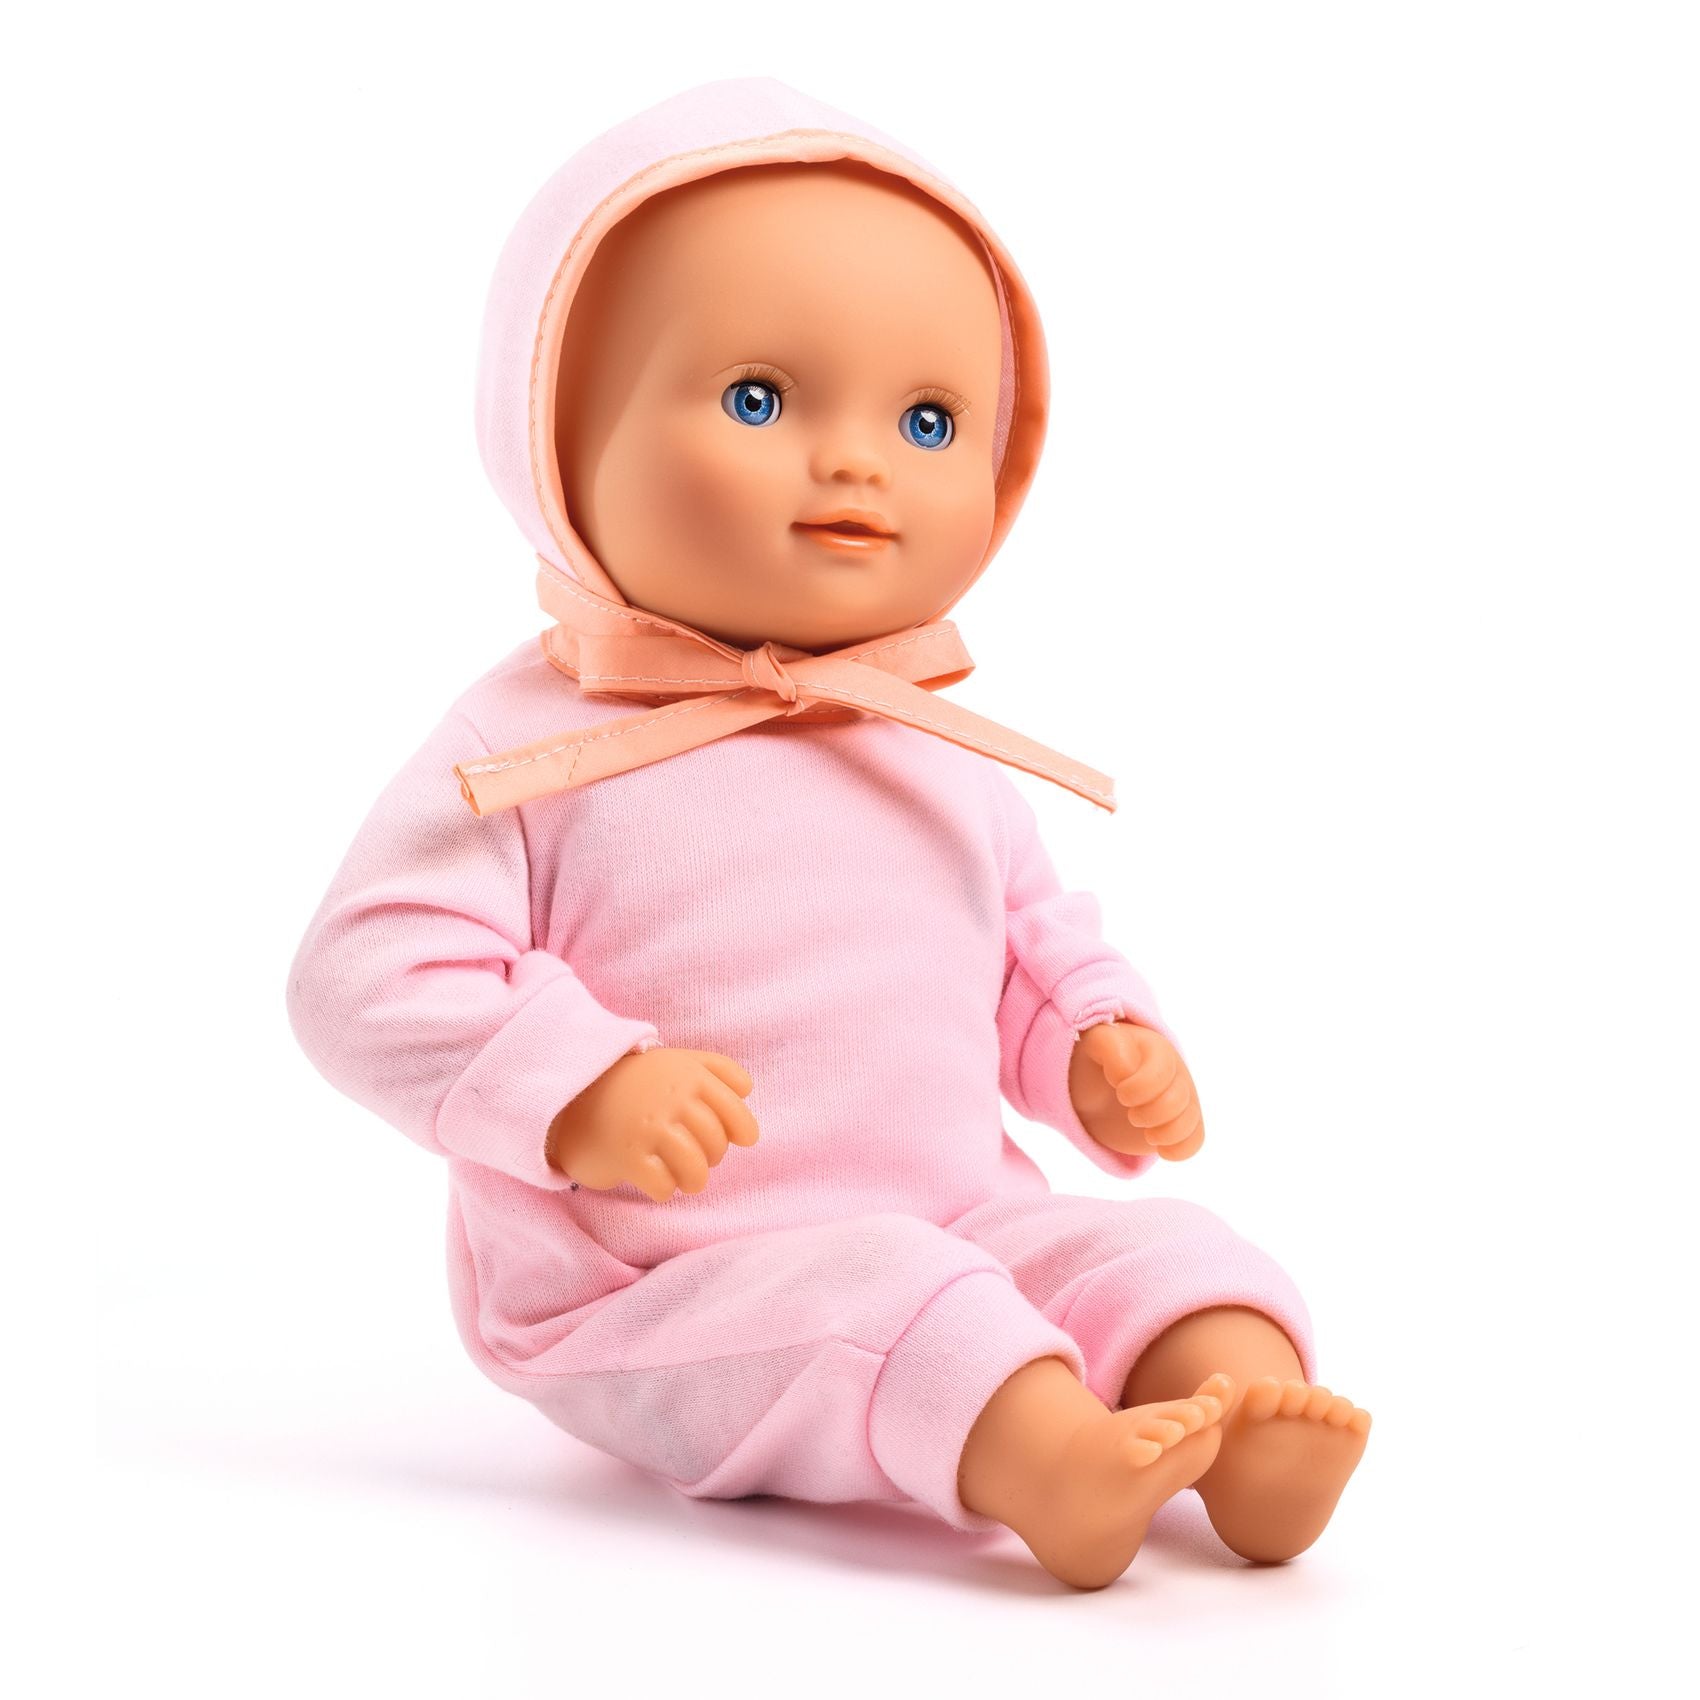 Baby Lilas Rose Soft Doll